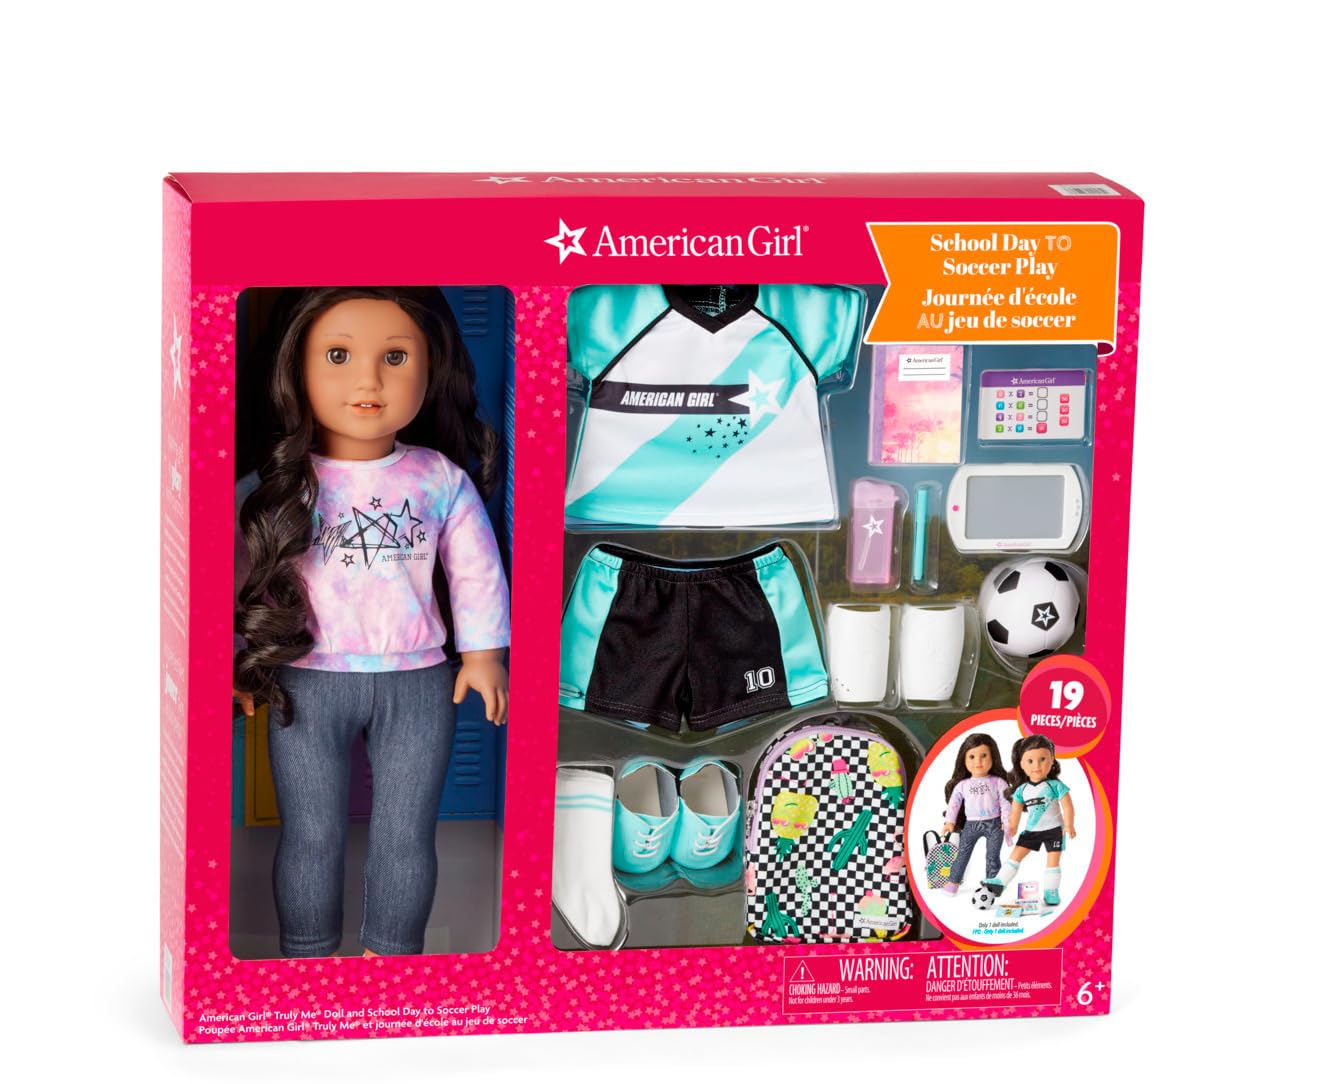 American Girl Truly Me 18-inch Doll 82 and School Day to Soccer Play Set with Brown Eyes, Curly Dark-Brown Hair, tan Skin with Warm Neutral Undertones, tie-dye Sweatshirt, Supplies, Game Gear Ages 6+